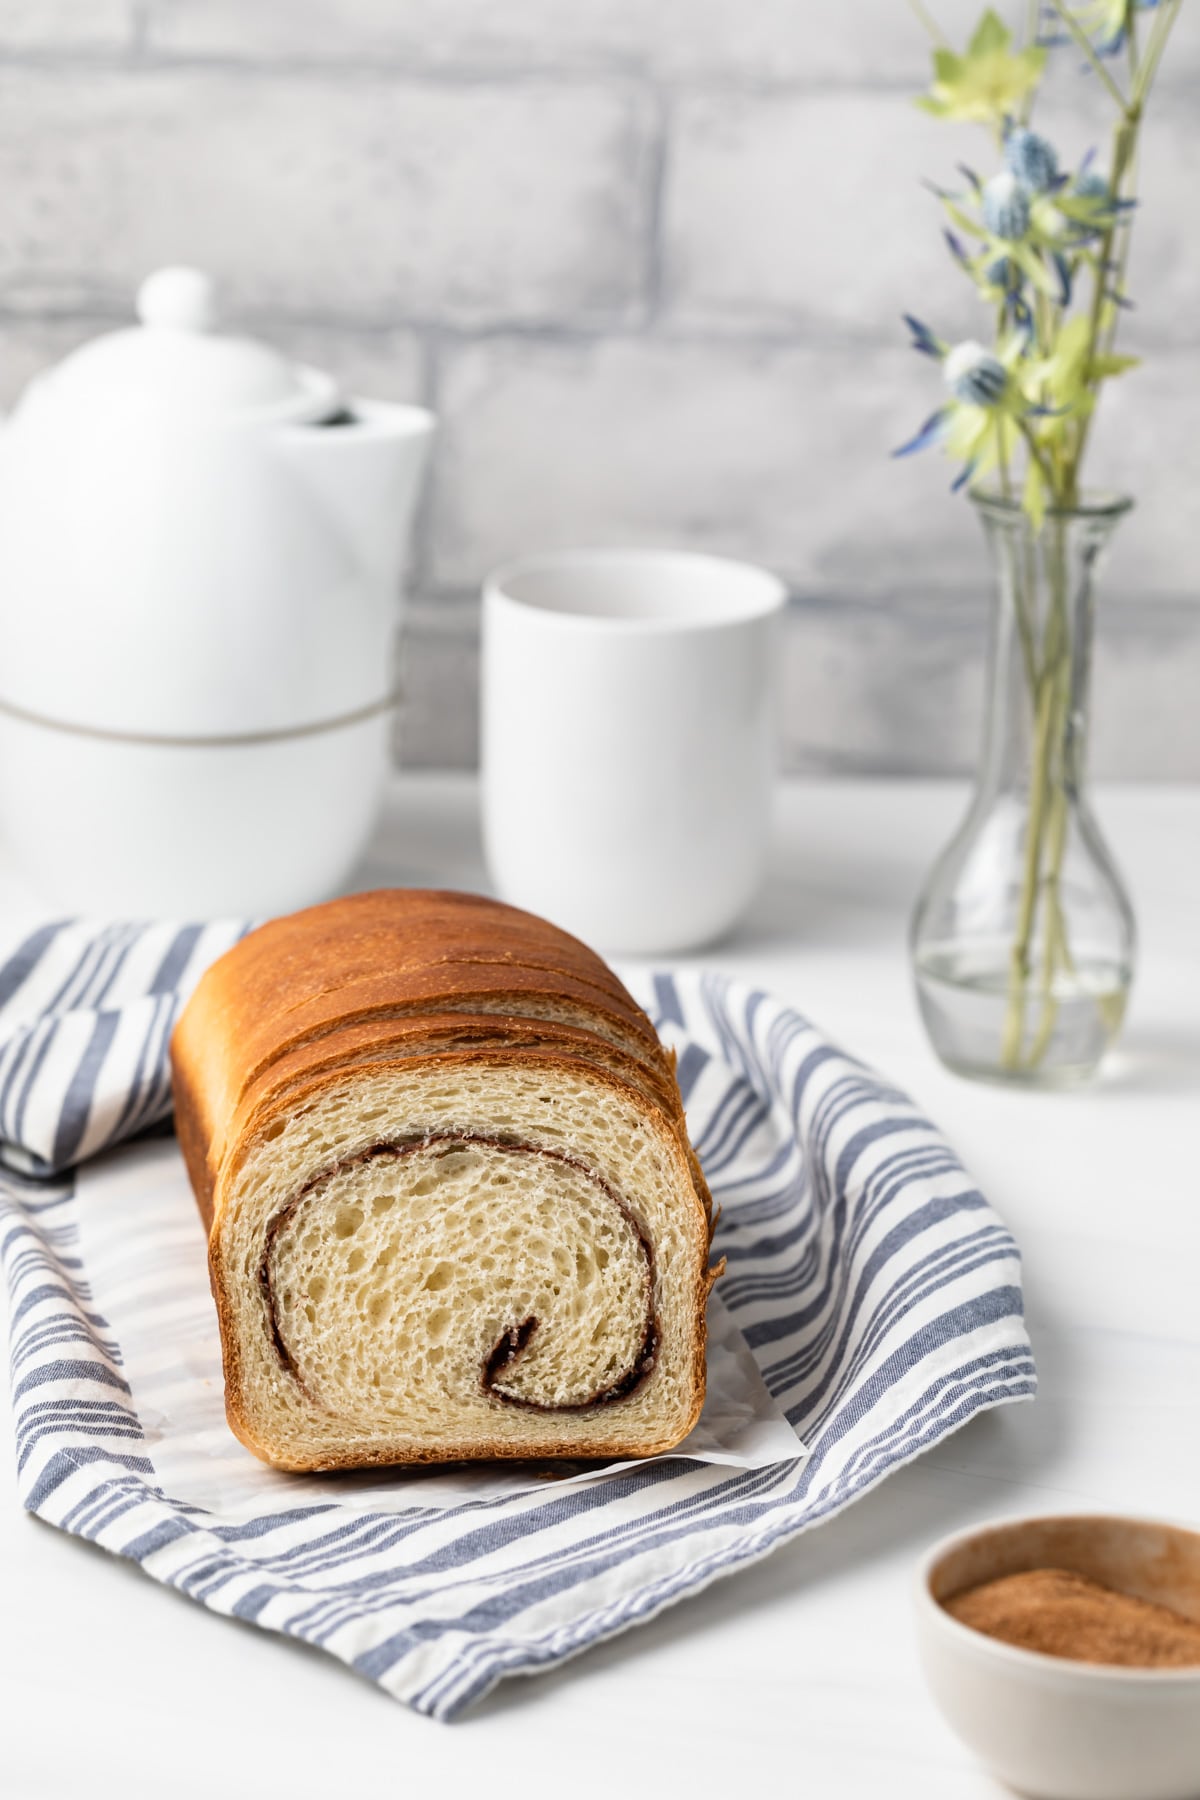 bread with cinnamon swirl on blue striped tea towel with tea pot and cup